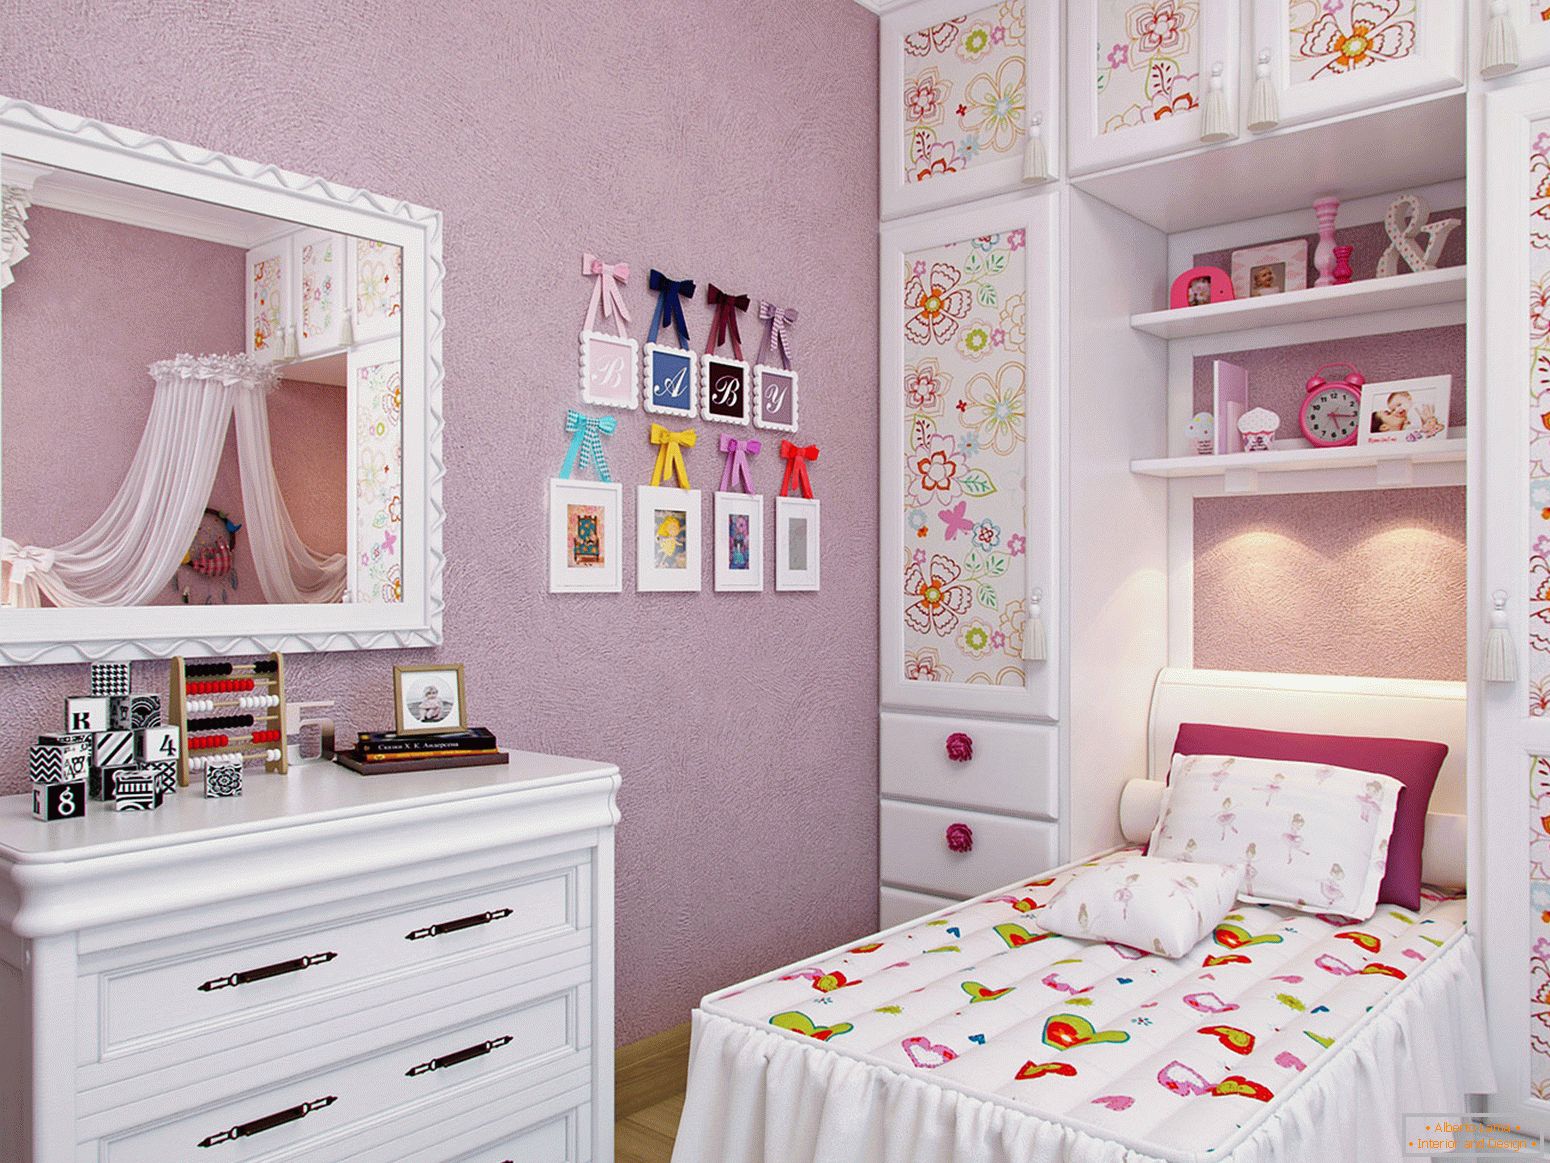 Beautiful design of a small children's room